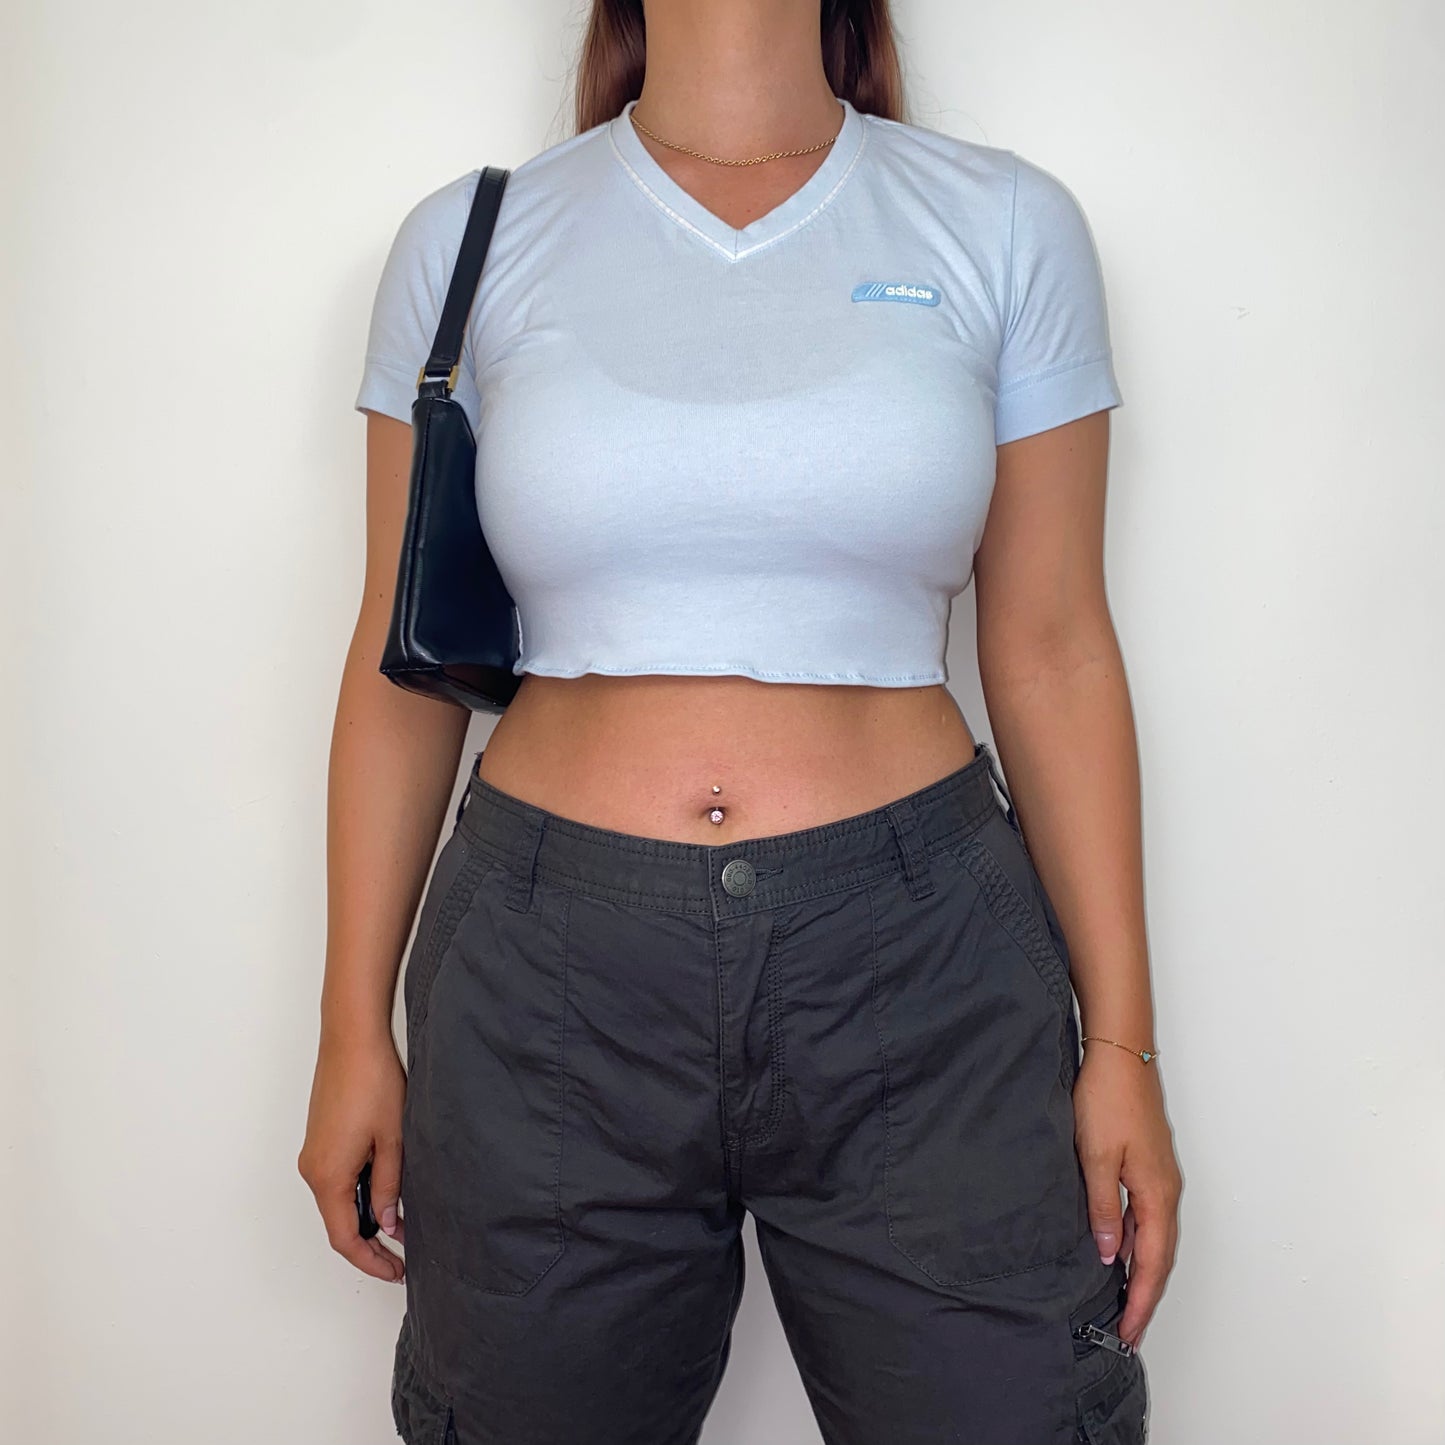 light blue short sleeve crop top with white adidas logo shown on a model wearing grey trousers and black shoulder bag